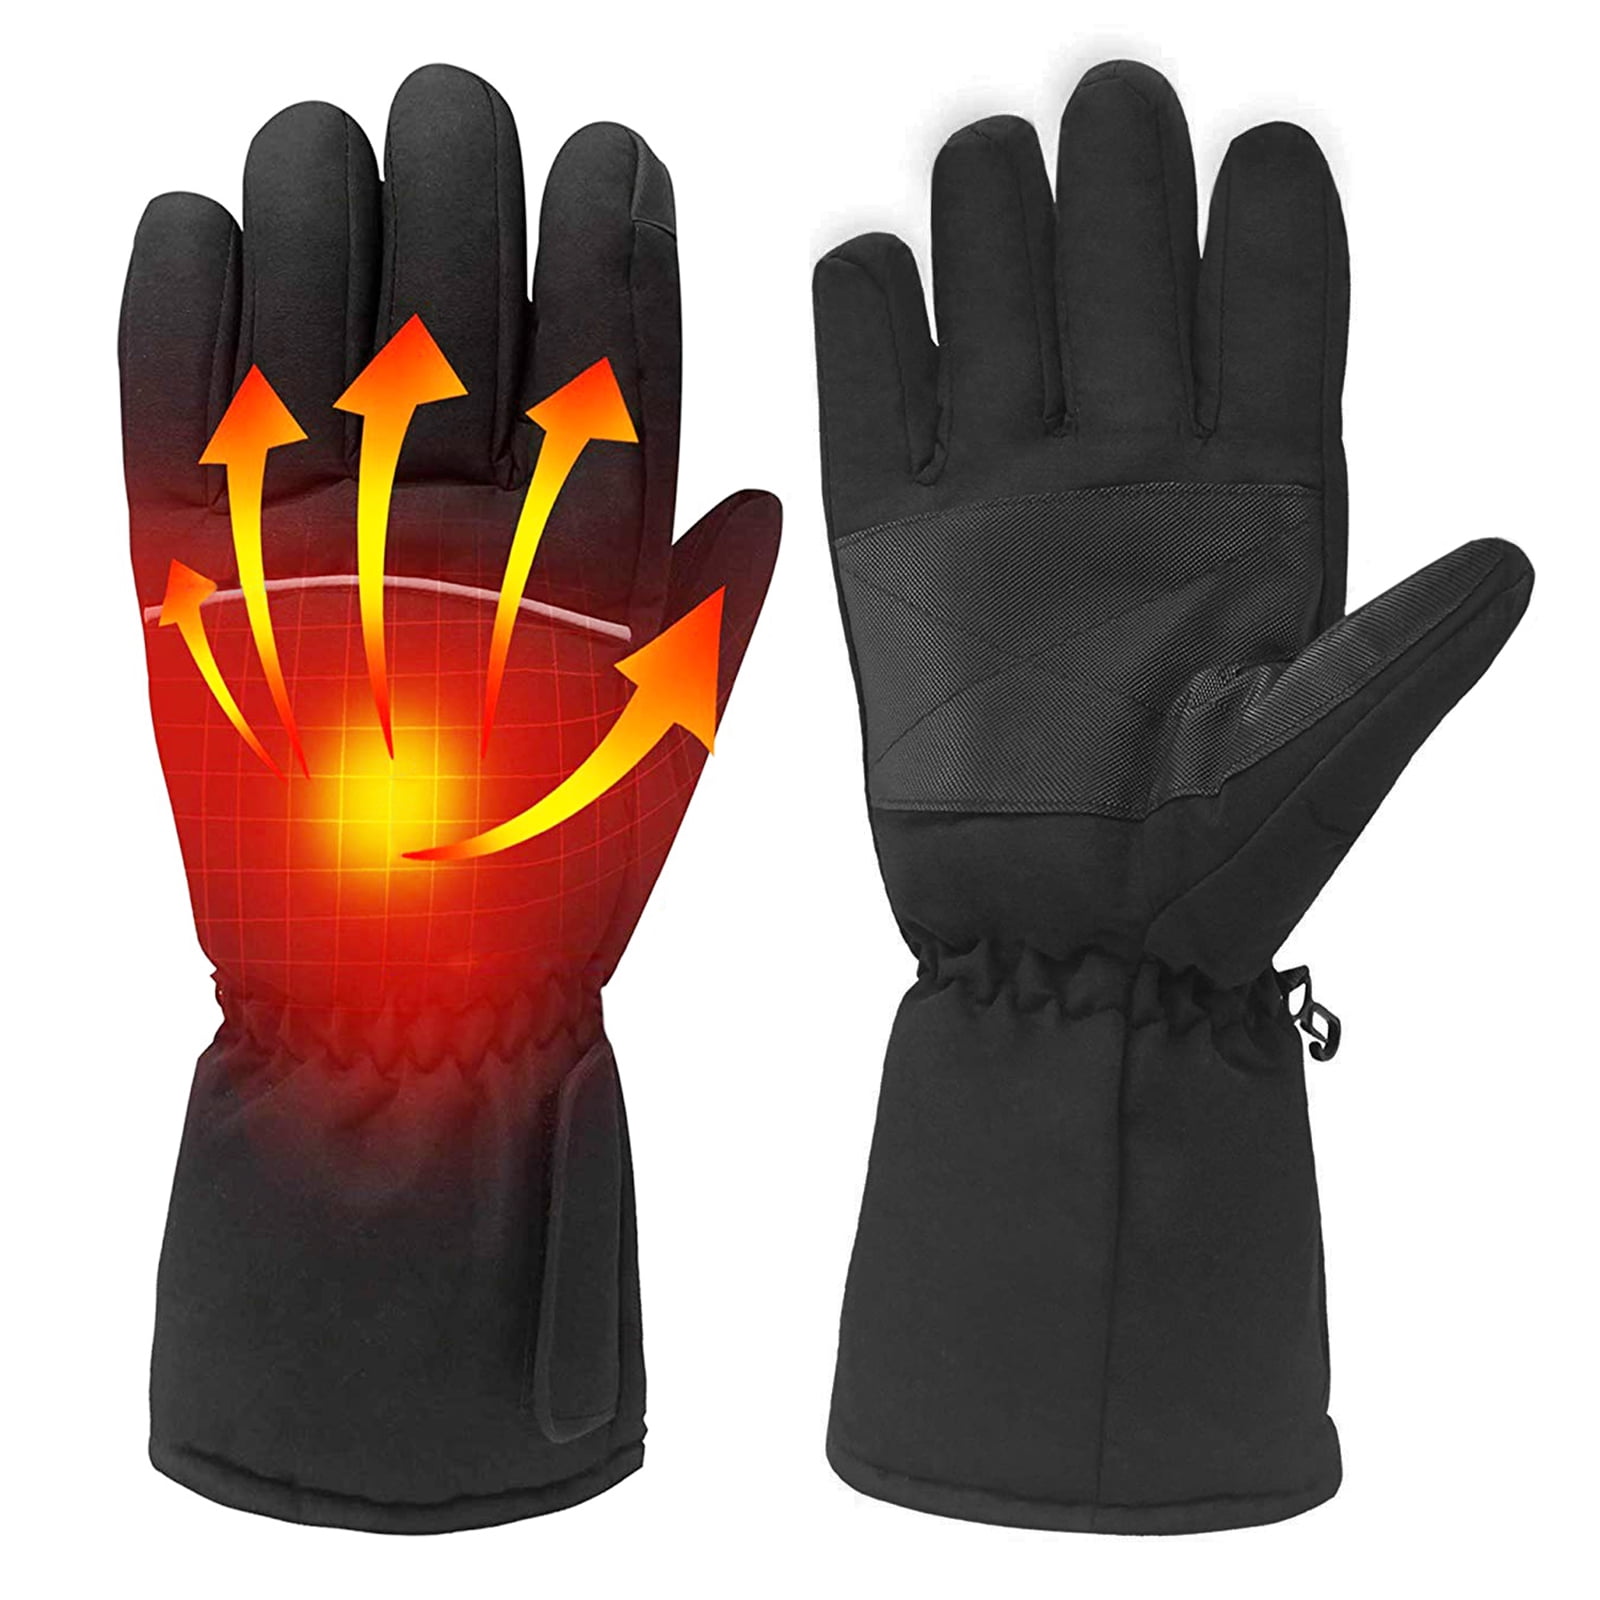 25℃ Waterproof Touch Screen Skiing Cycling Riding Thermal Warm Gloves Men 